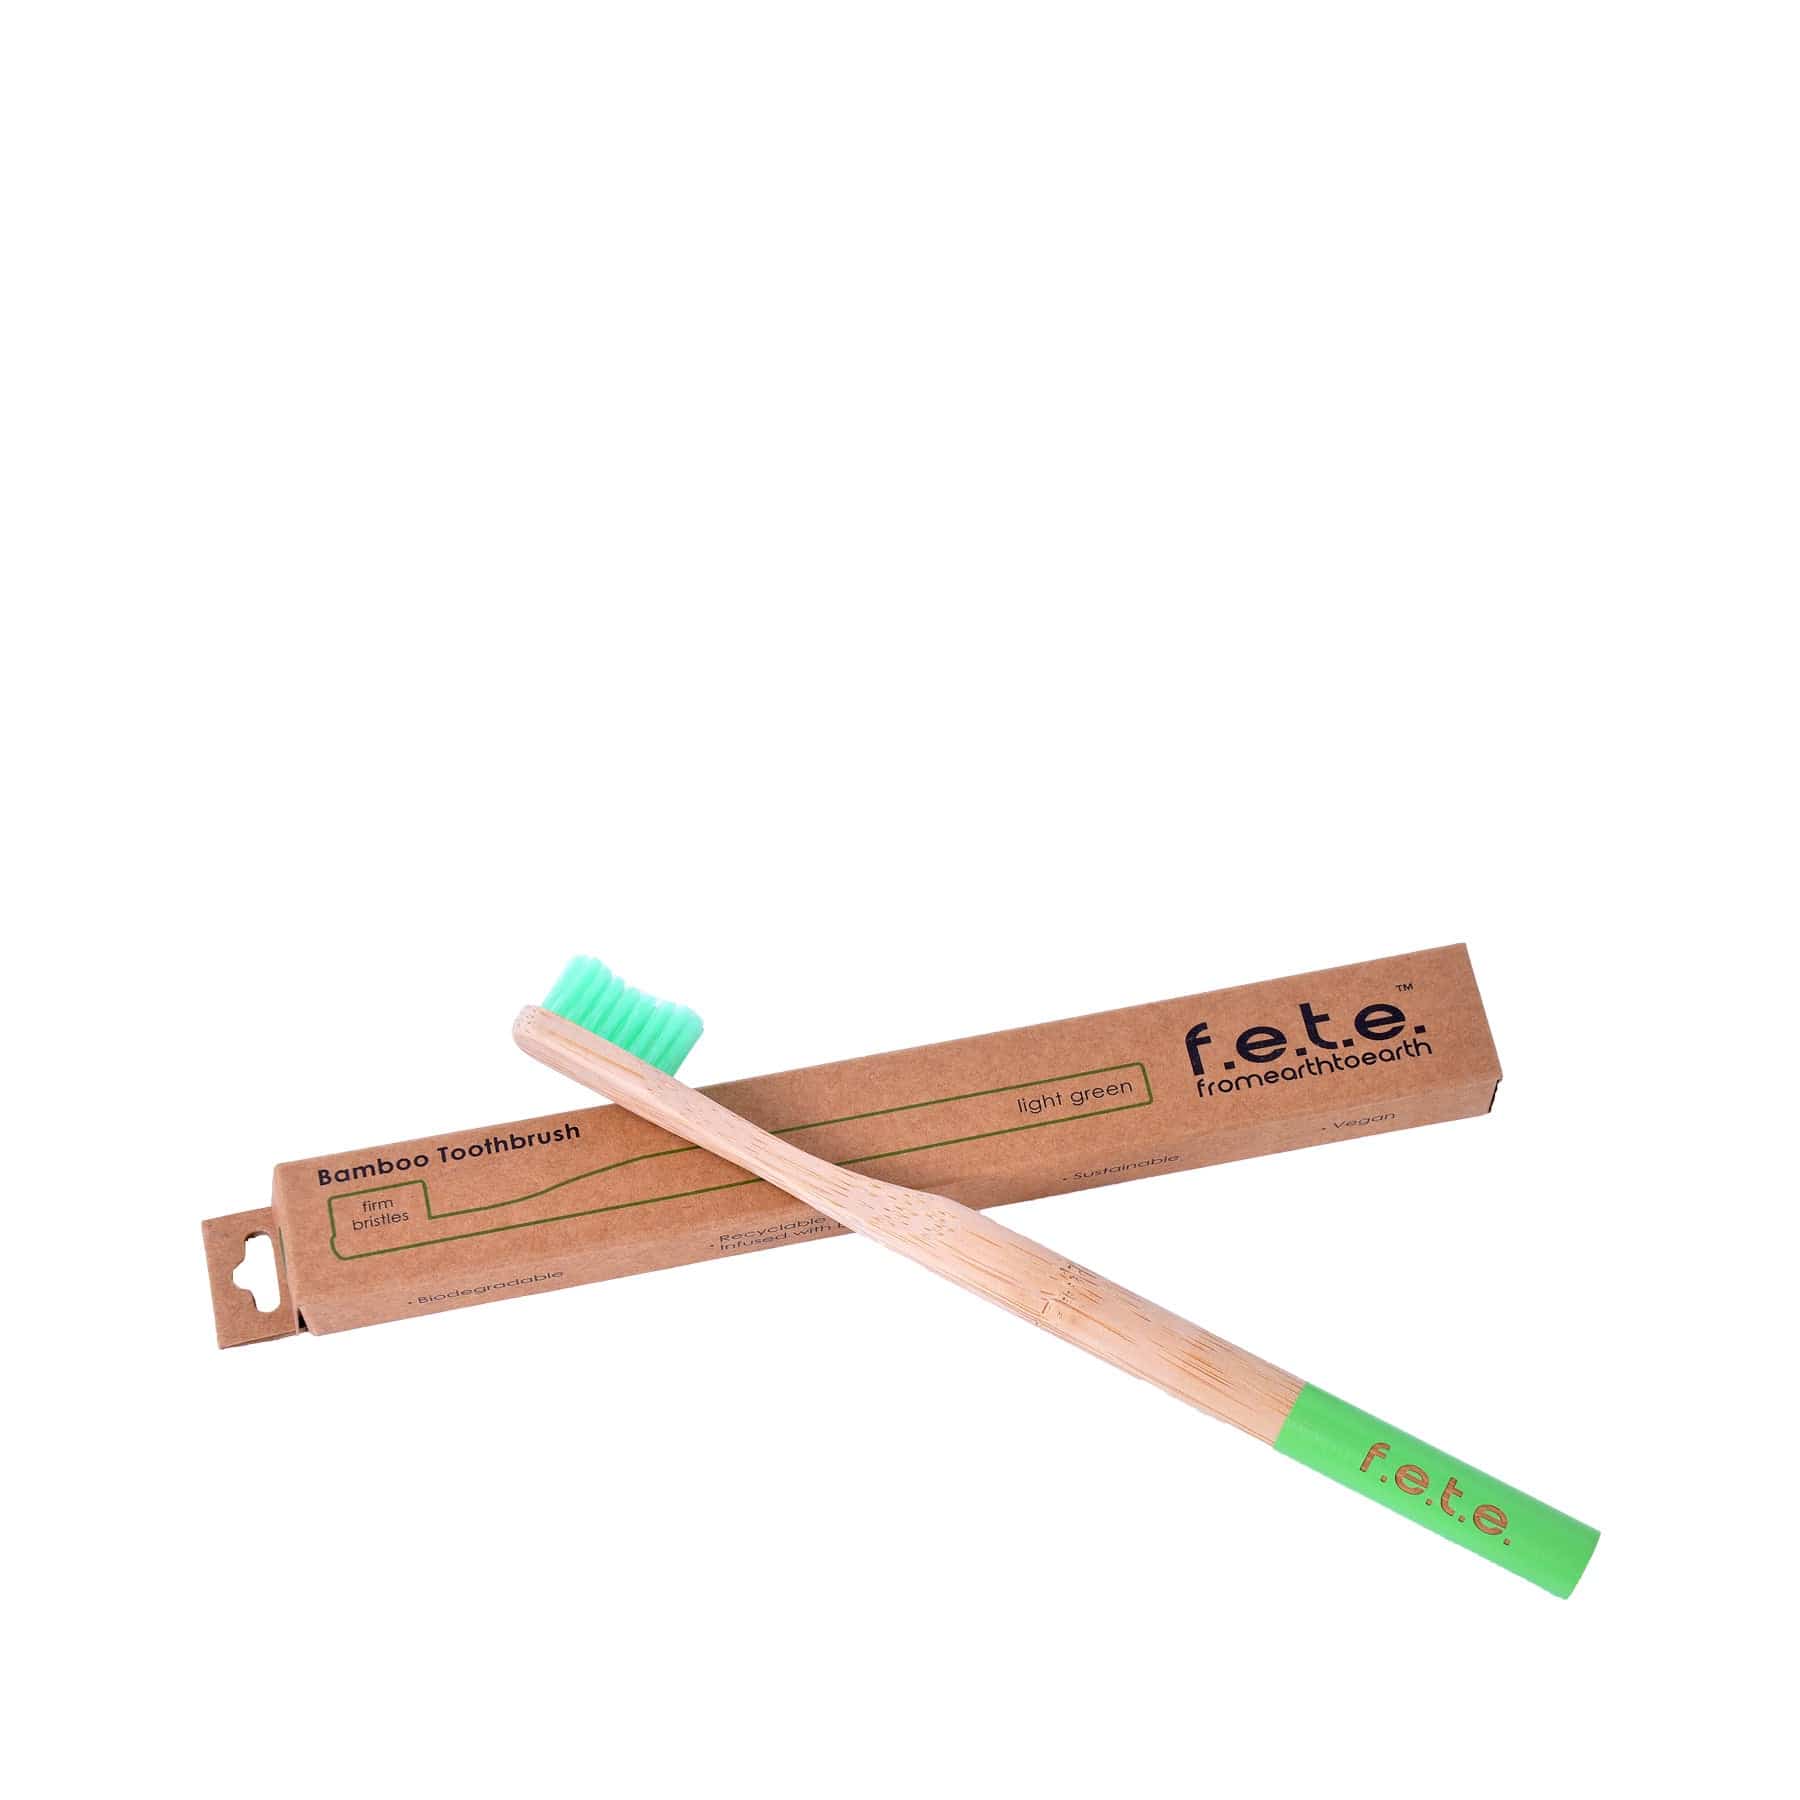 Bamboo toothbrush - firm green